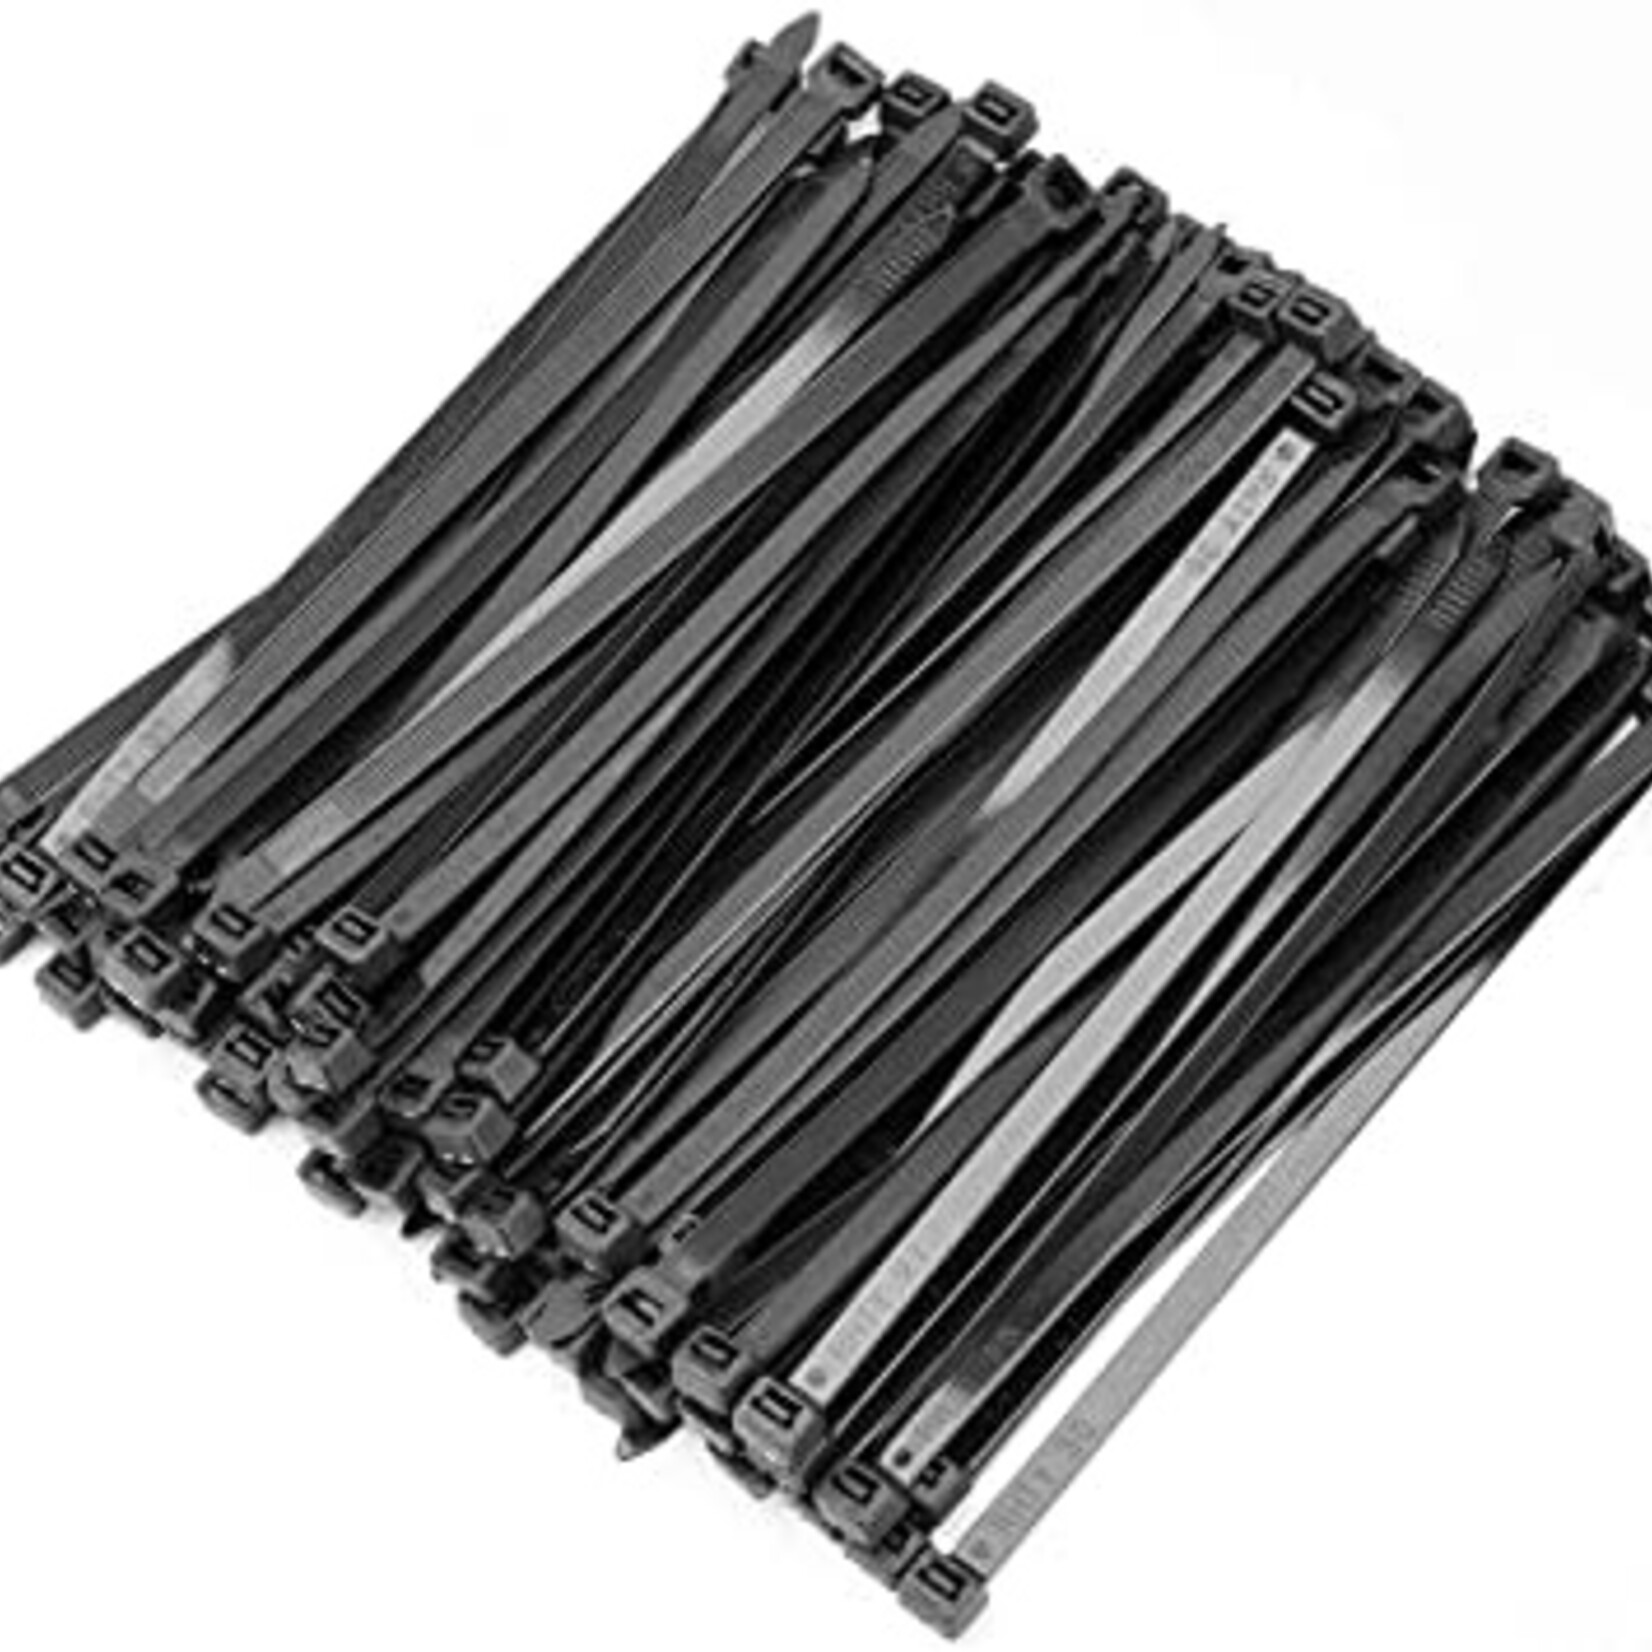 Cable Ties Pack (100pcs) Black 8" x 50 lbs